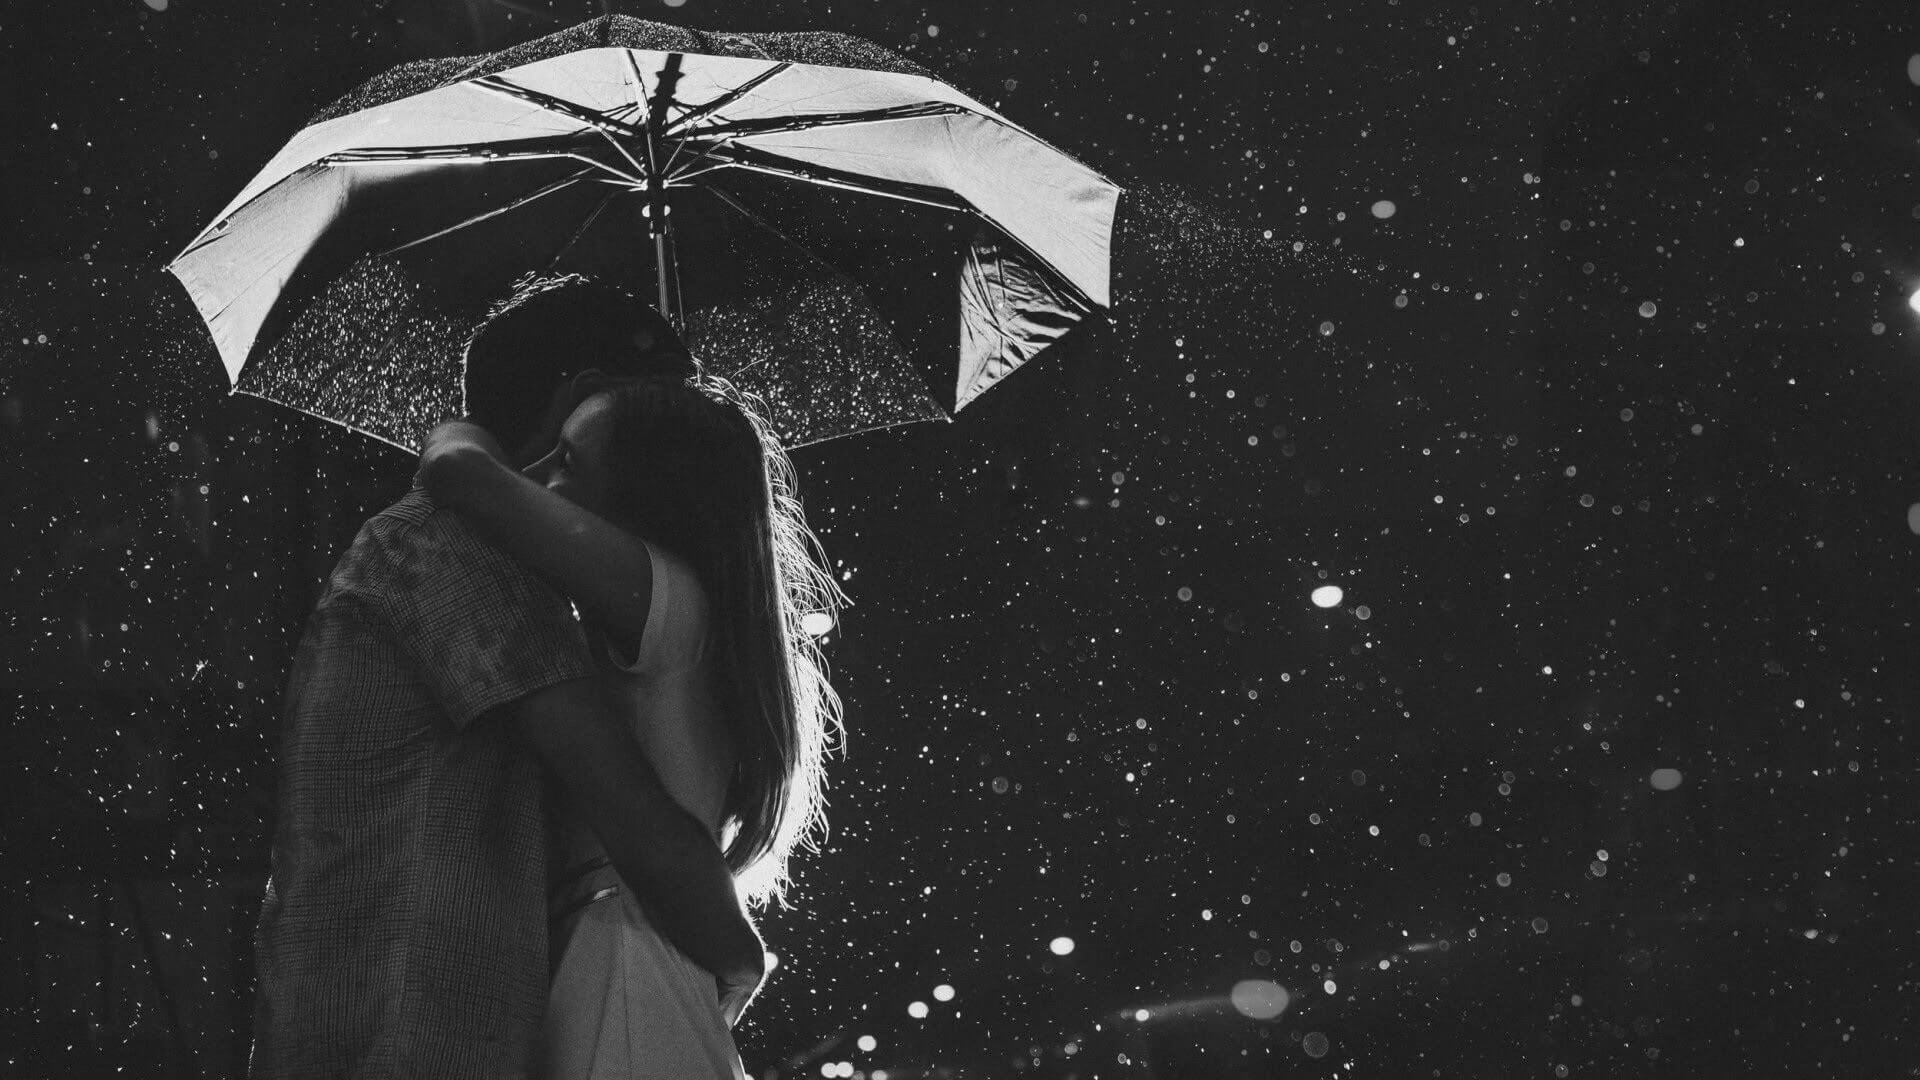 Cute HD Love and Romance Pictures Of Couples In Rain – EntertainmentMesh